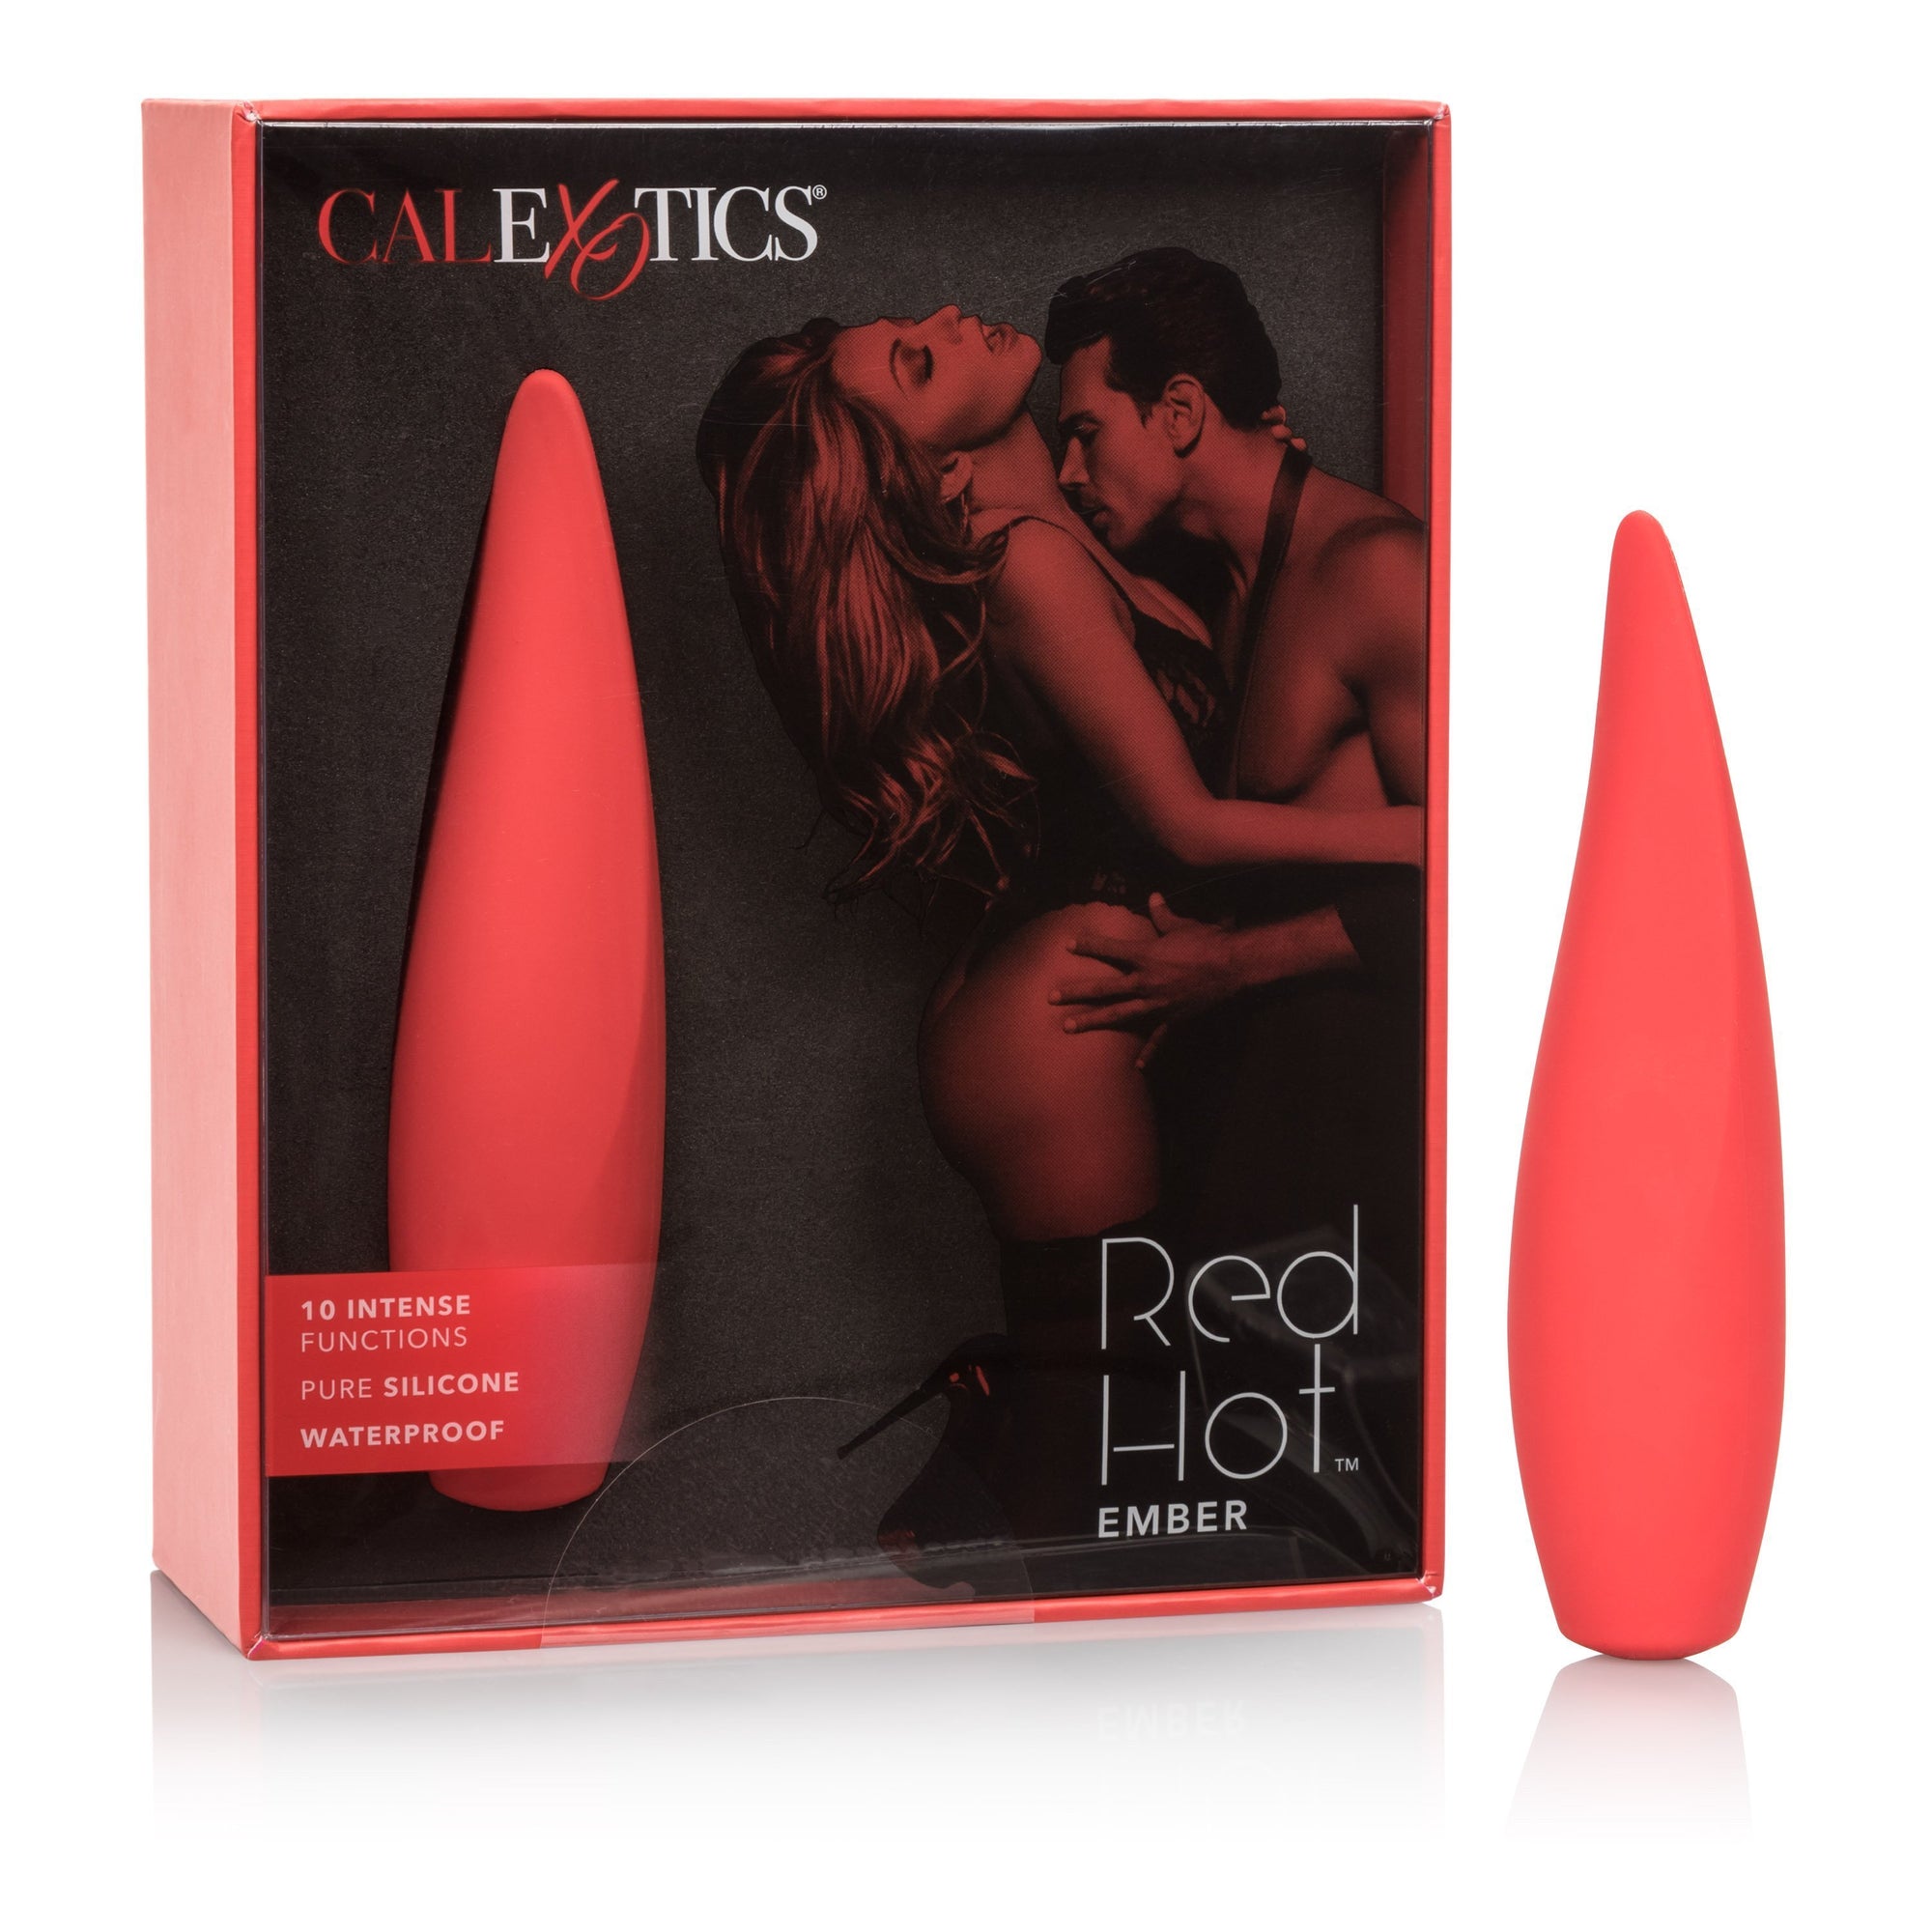 California Exotics - Red Hot Ember Rechargeable Clit Massager (Red) Clit Massager (Vibration) Rechargeable Durio Asia